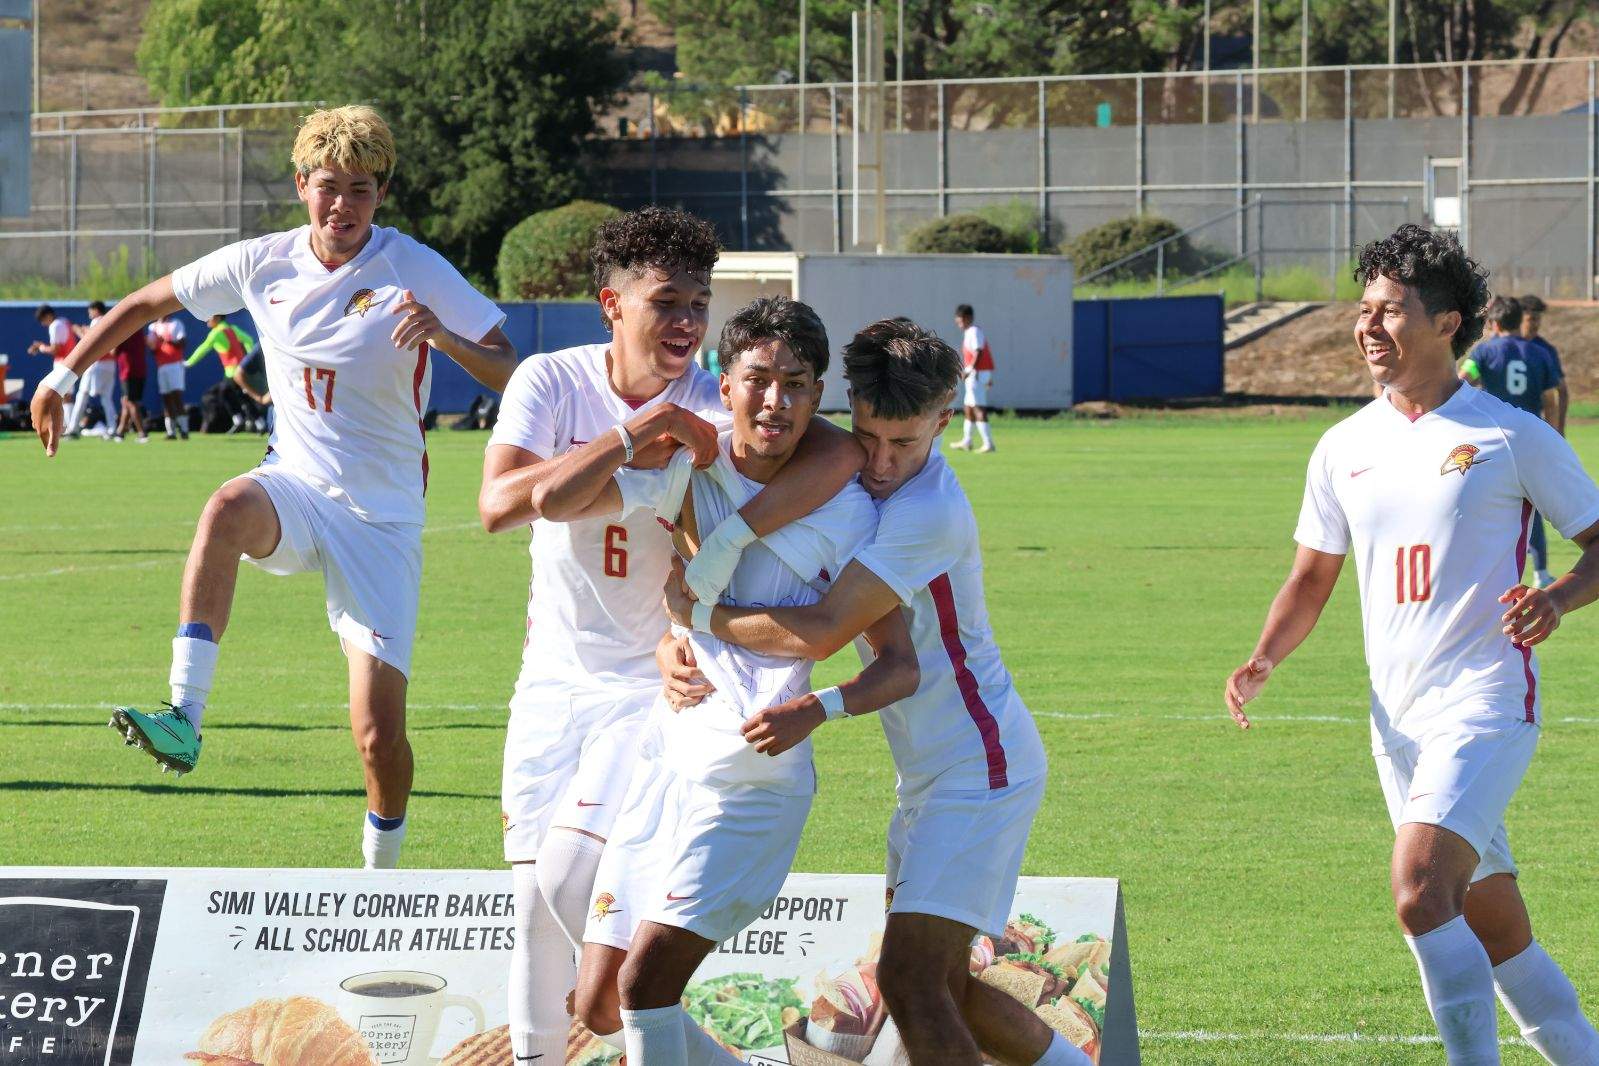 Teammates celebrate after Eduardo Sanchez (center) scored a goal in PCC's men's soccer win at Moorpark Friday (photo by Richard Quinton).